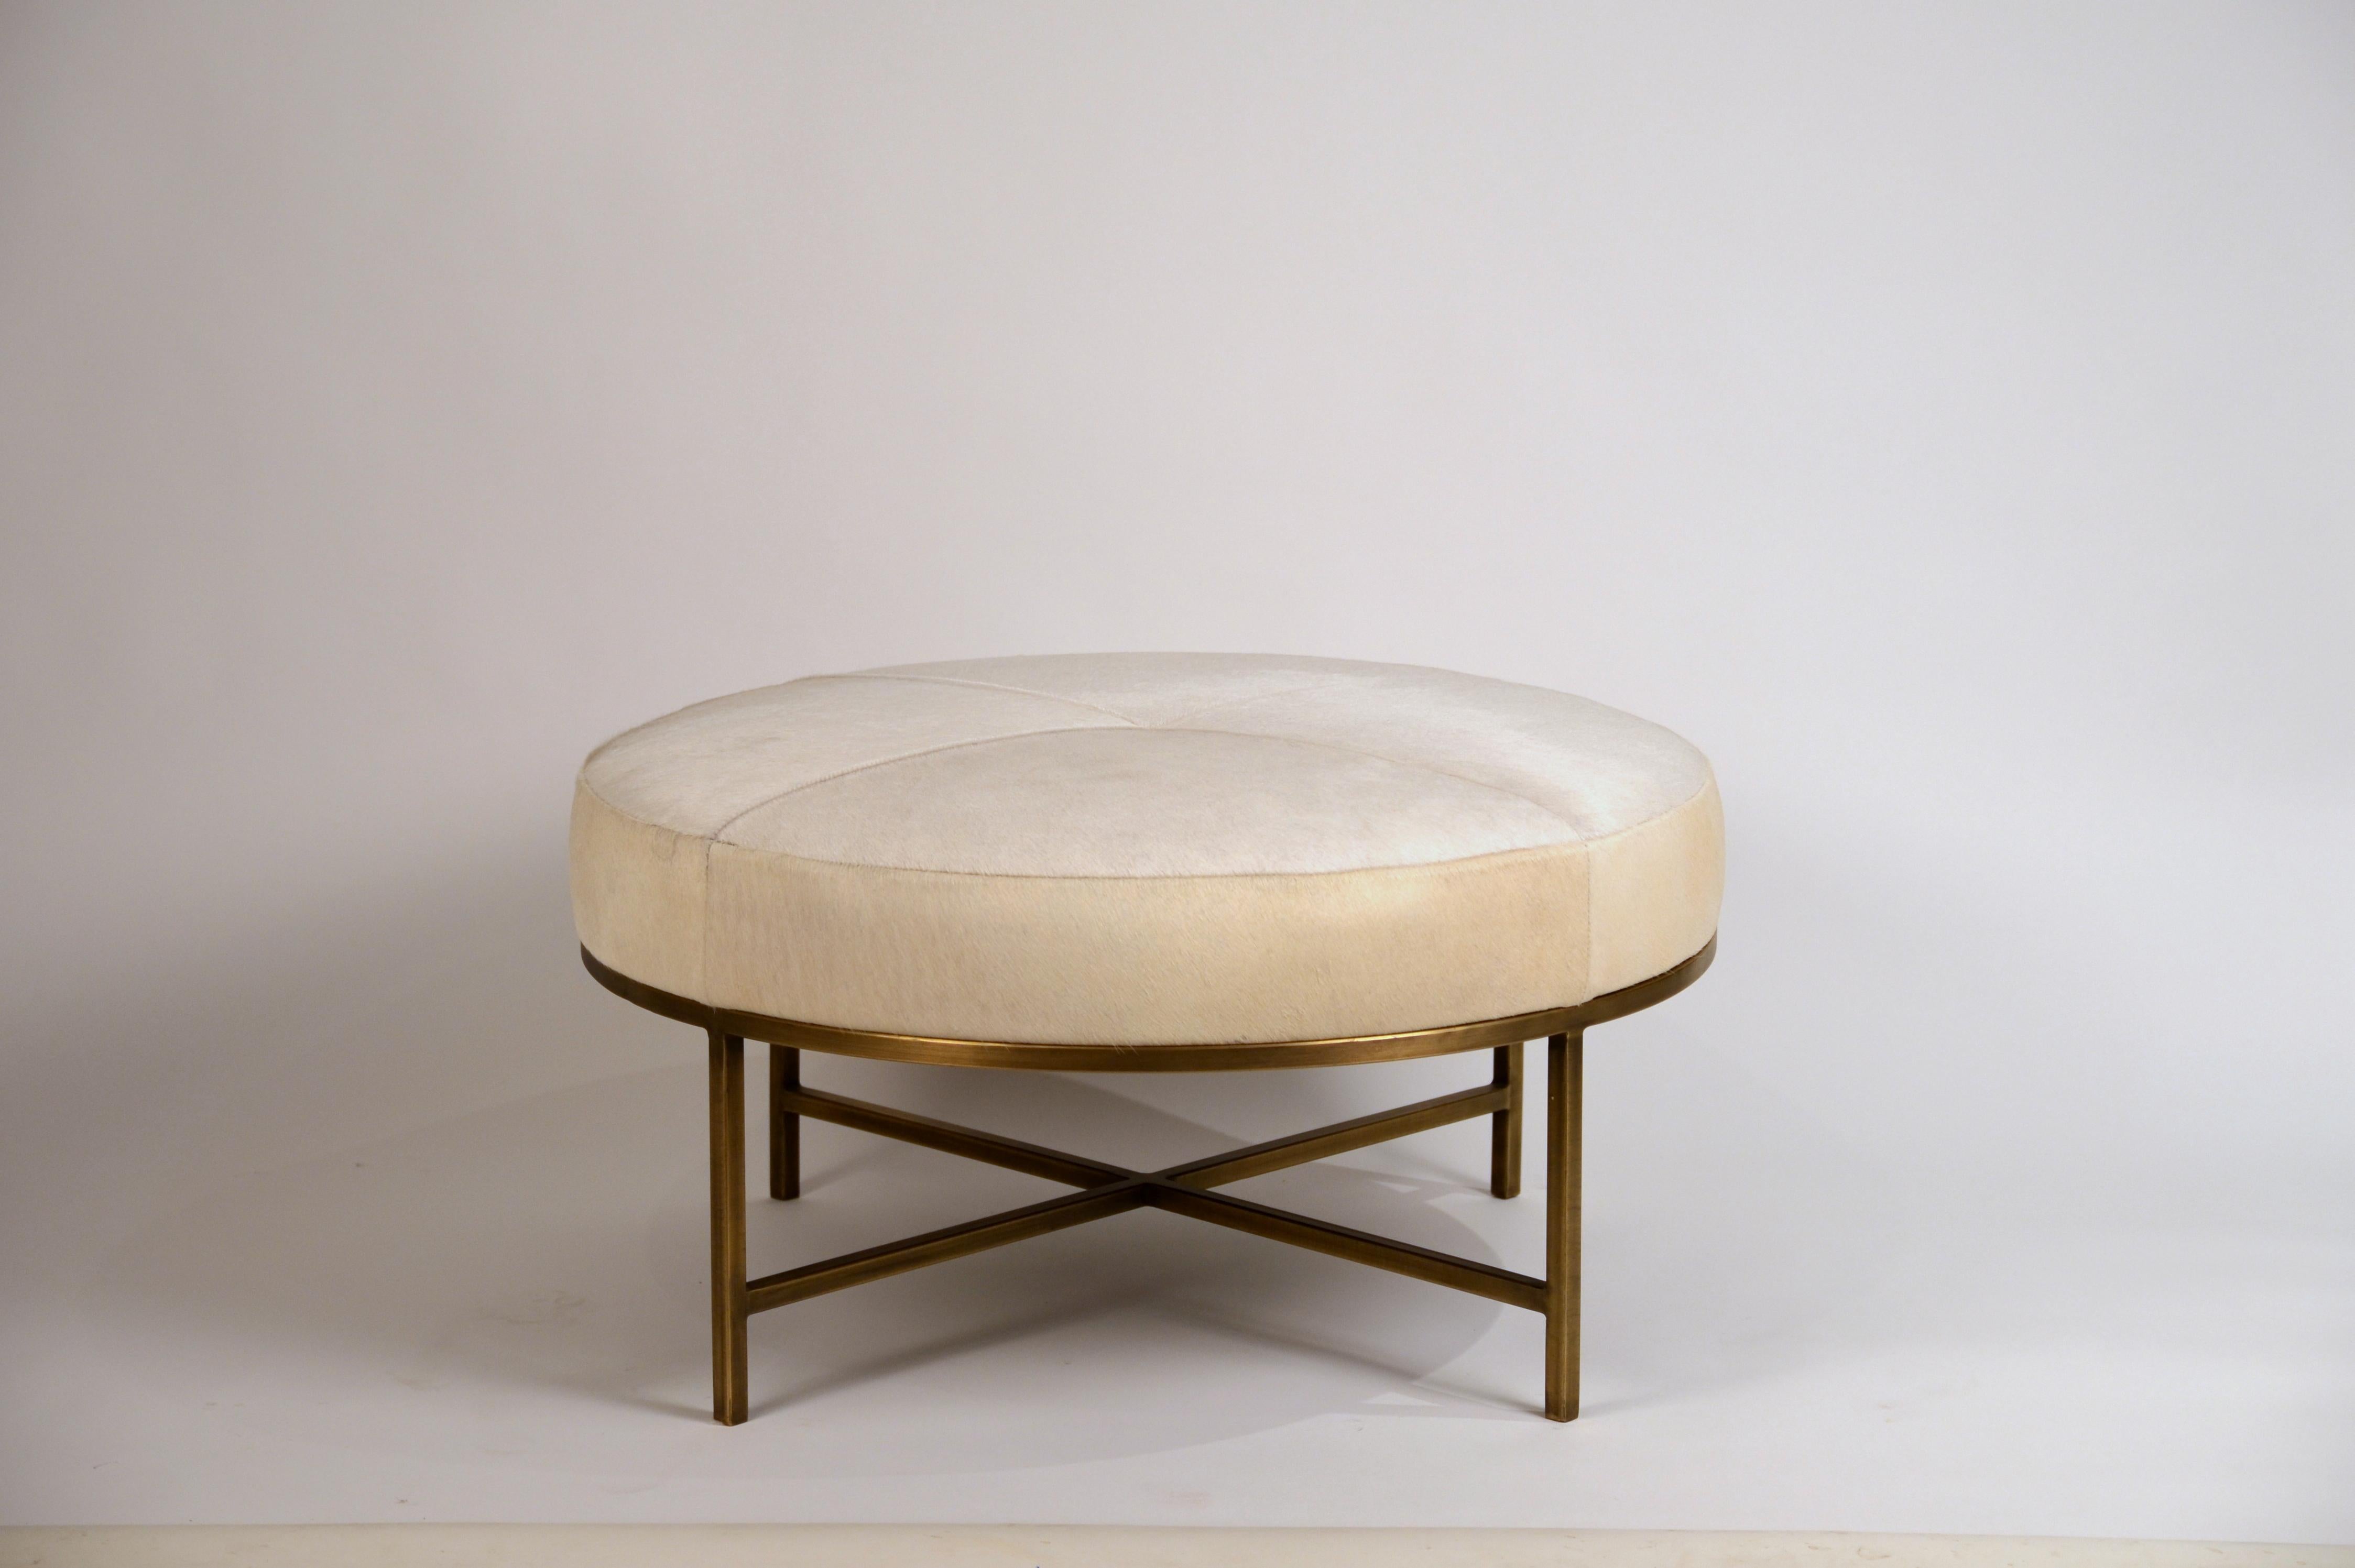 Small white hide and patinated brass 'Tambour' ottoman by Design Frères.

Perfect as a coffee table in the living room, a den or a media room.

Brass-plated and patinated steel base with handstitched natural white cream or ivory or white hide